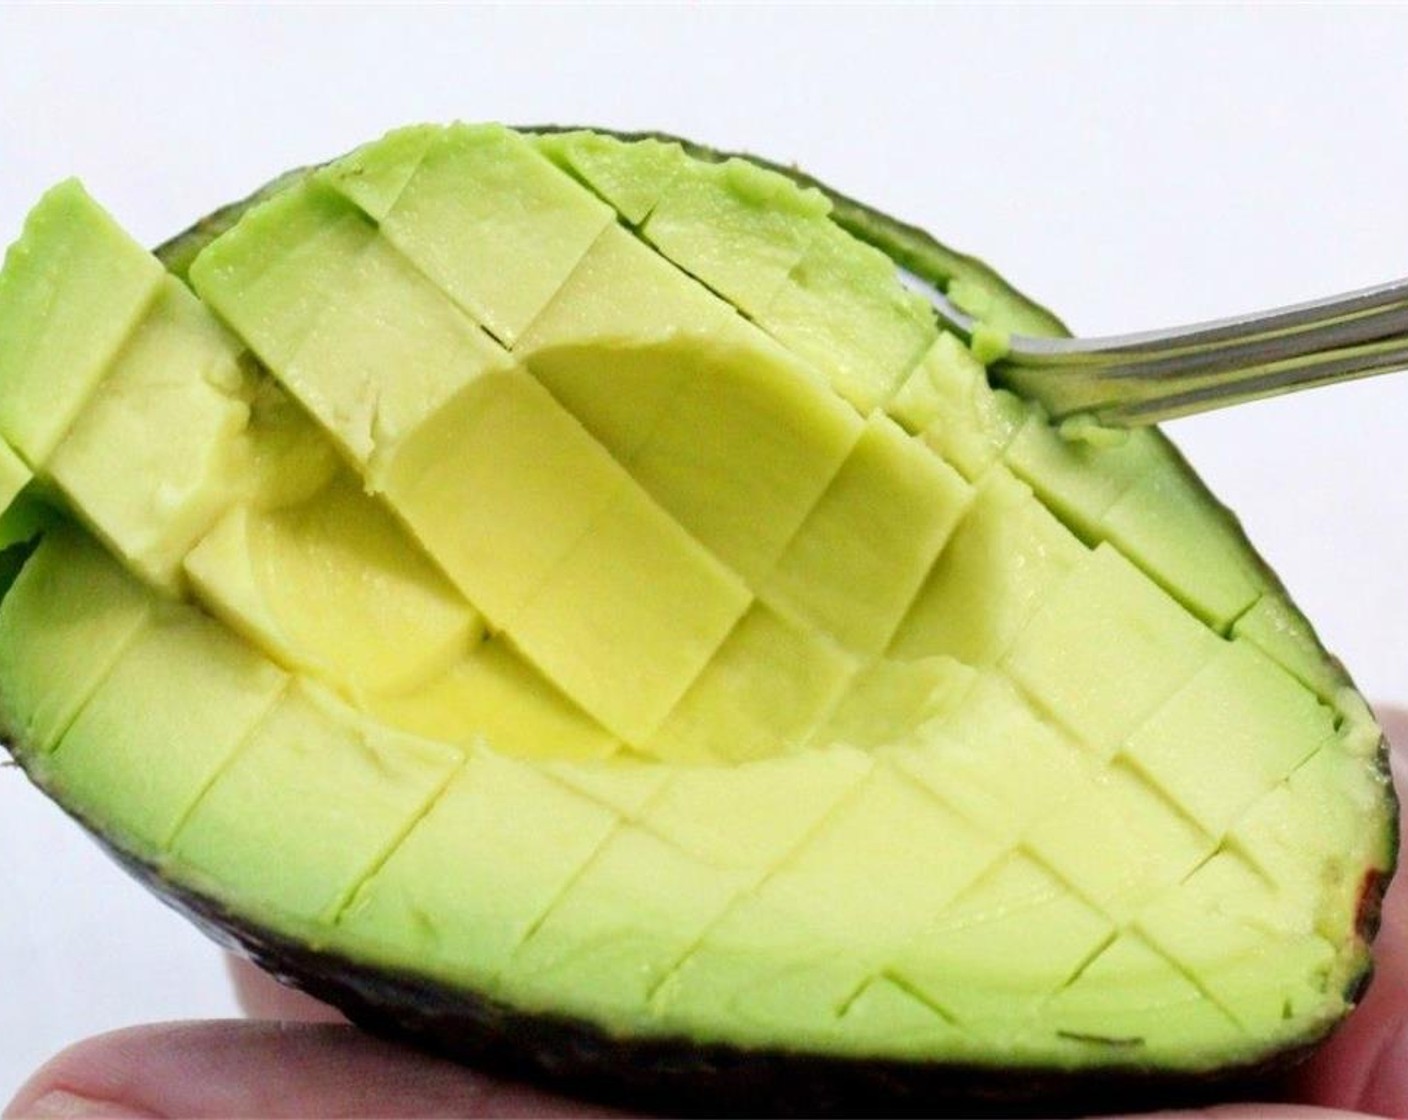 step 4 Pit the Avocado (1) by cutting it in half and removing the seed. Then score and scoop out the avocado.